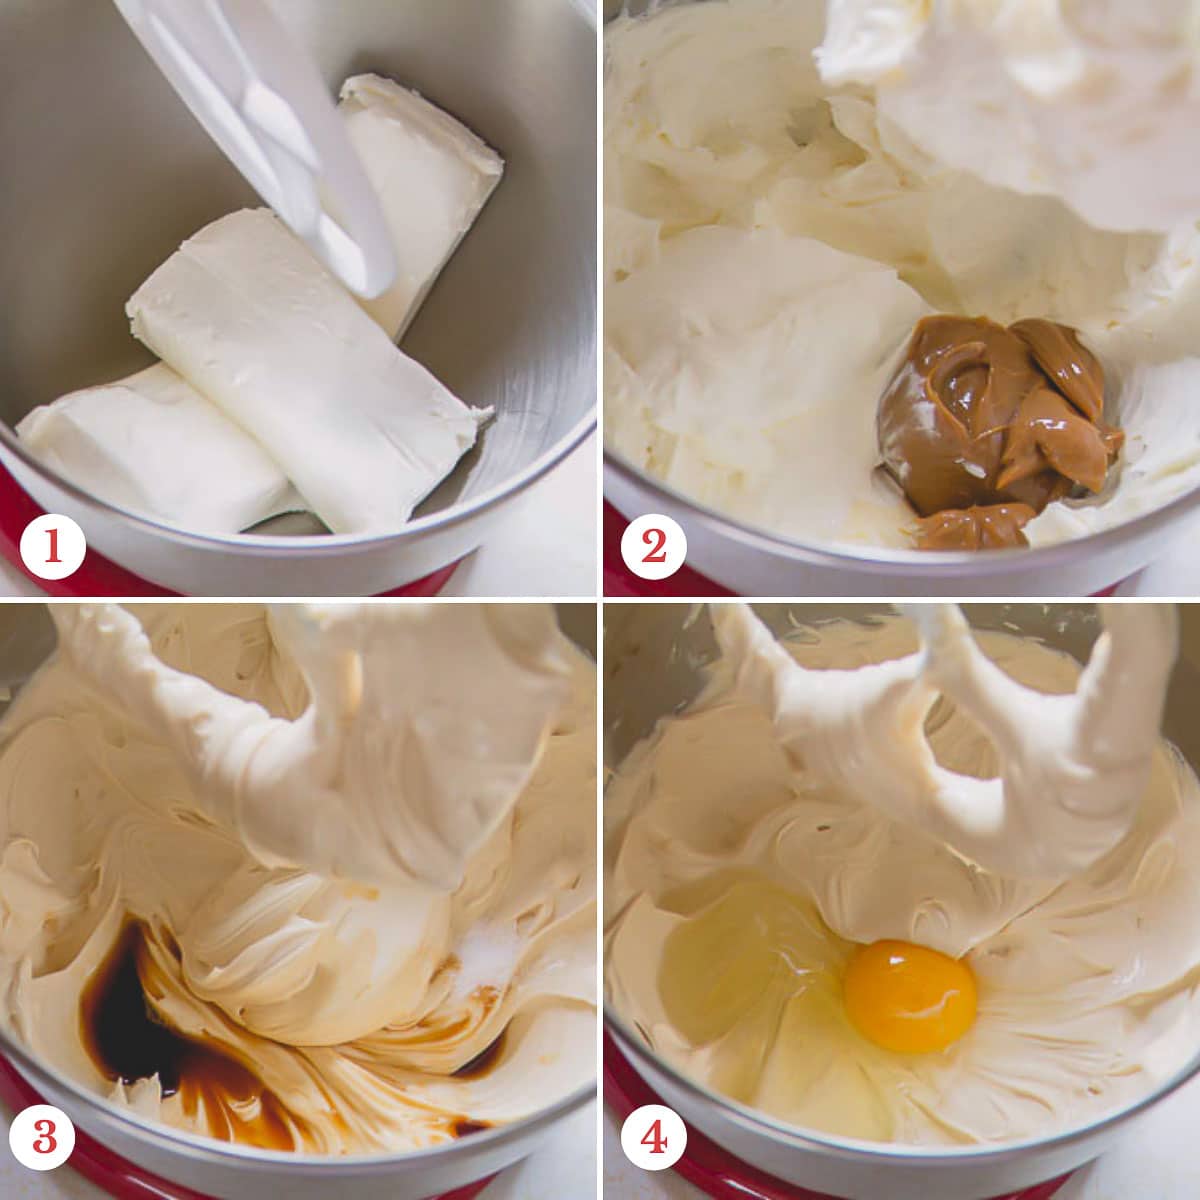 Step by step photos of making cheesecake filling.